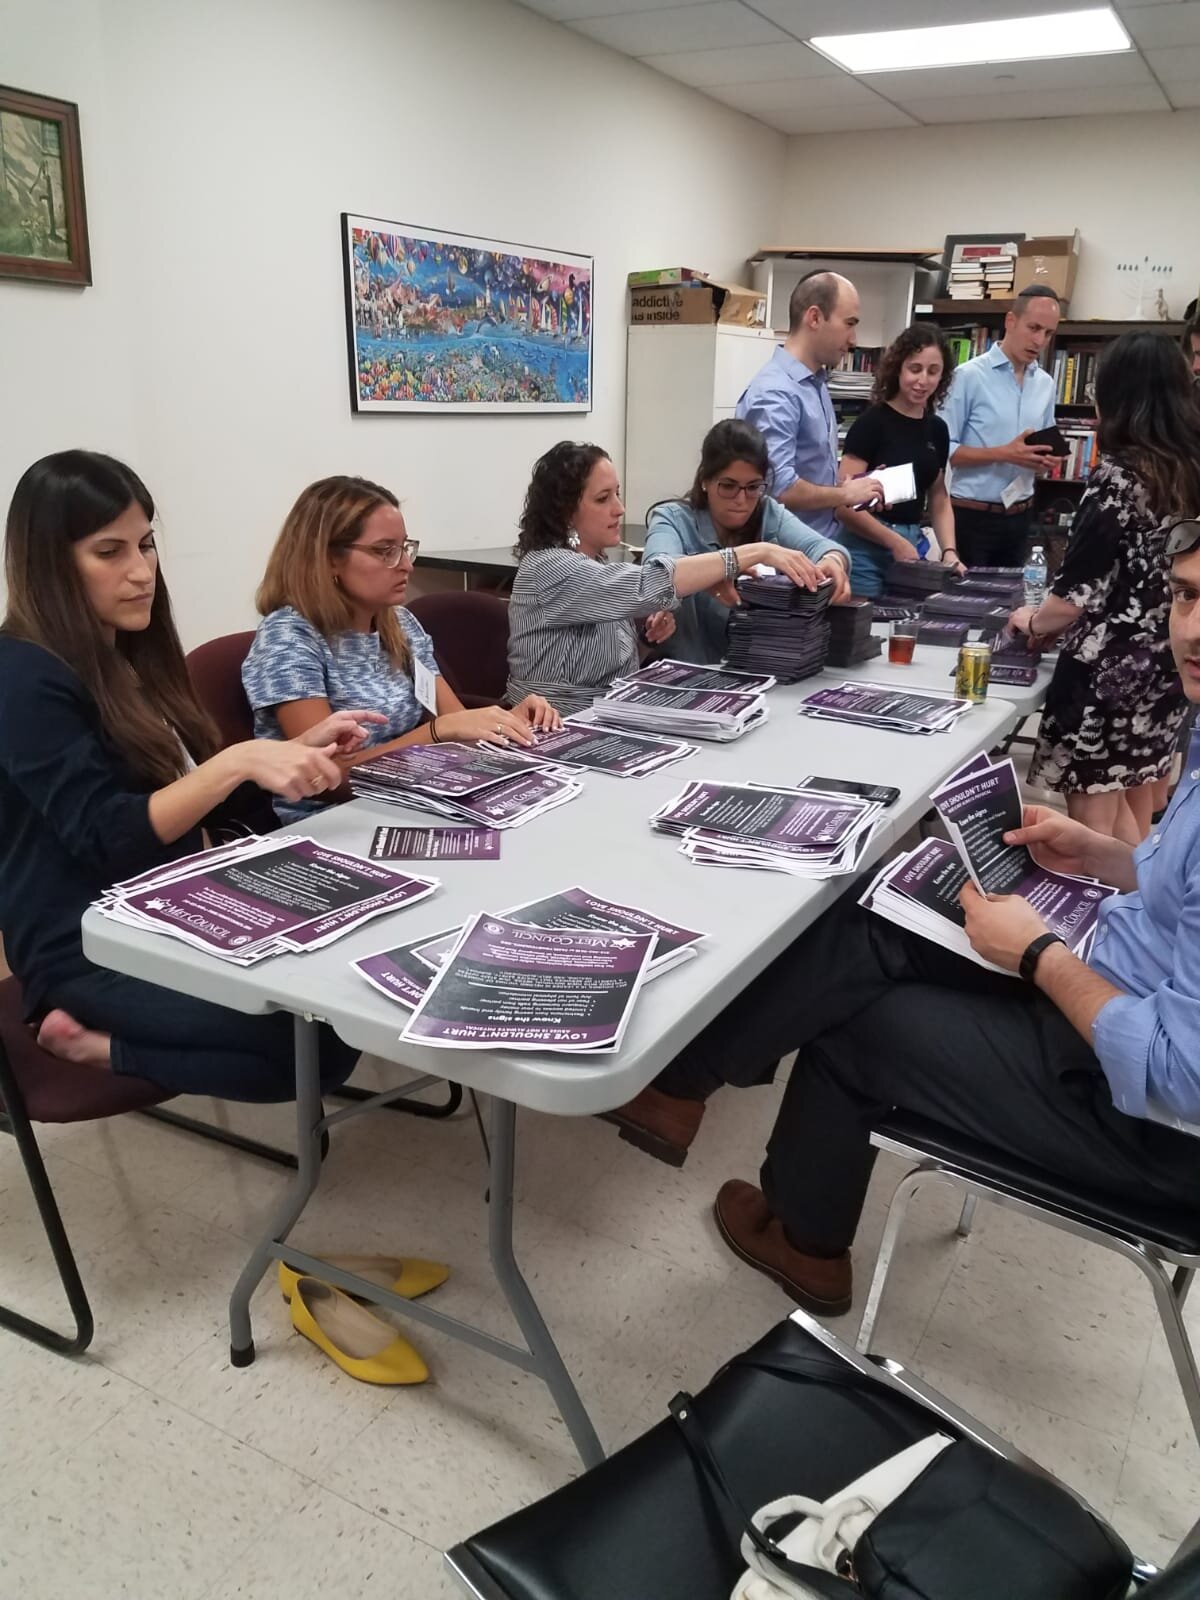 Volunteers sit at a long white table inside a rec room. They are all folding purple and black flyers for an event hosted by the Family Violence services program.